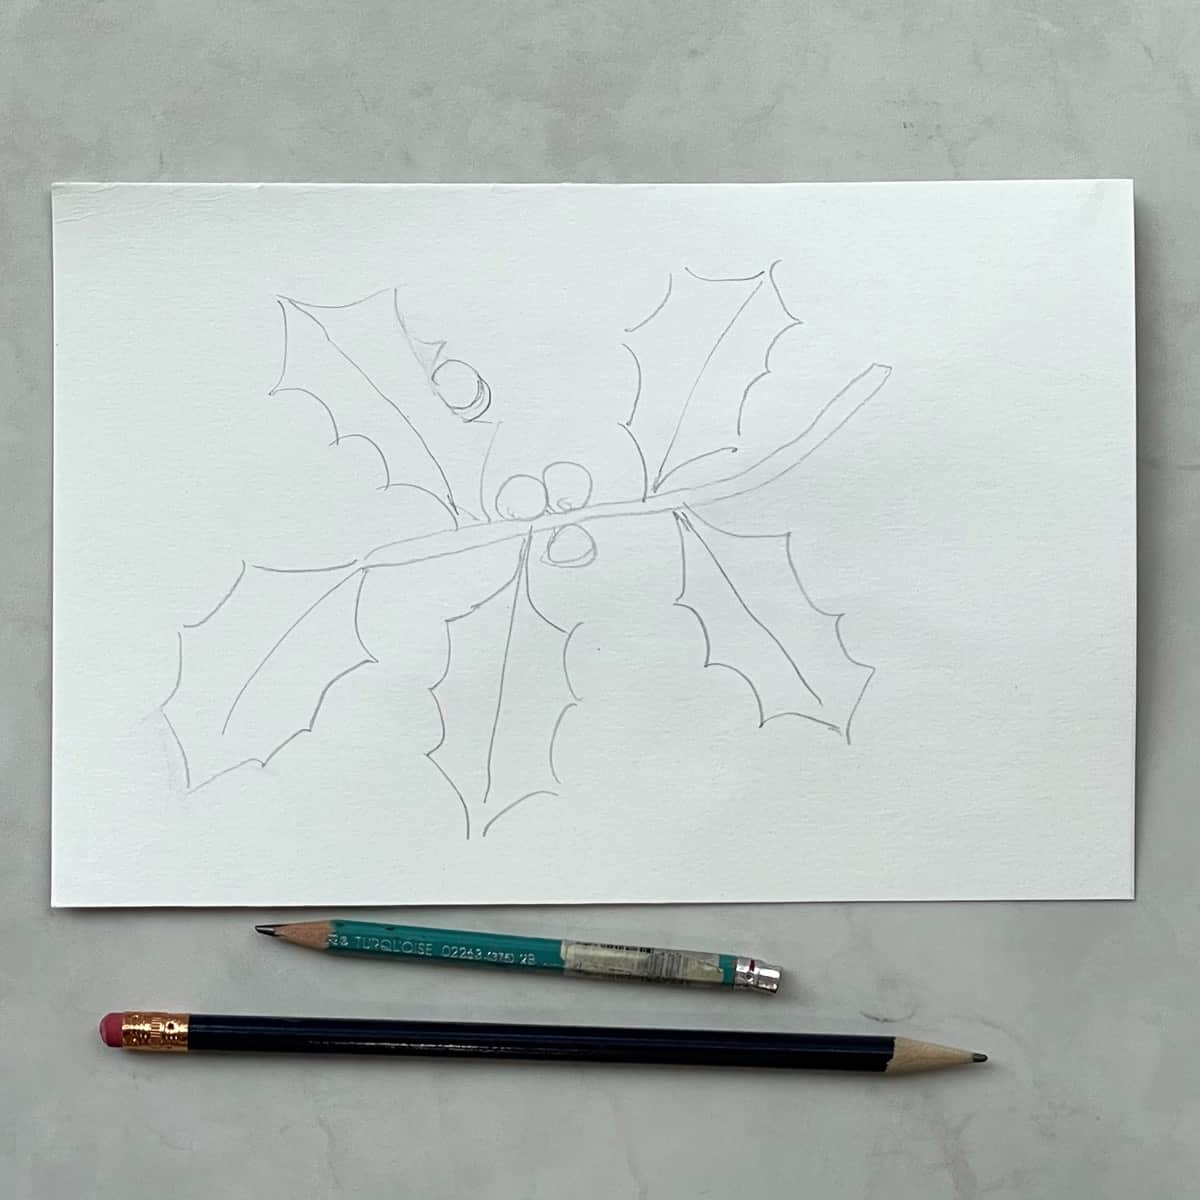 A light pencil sketch of holly leaves next to some drawing pencils.